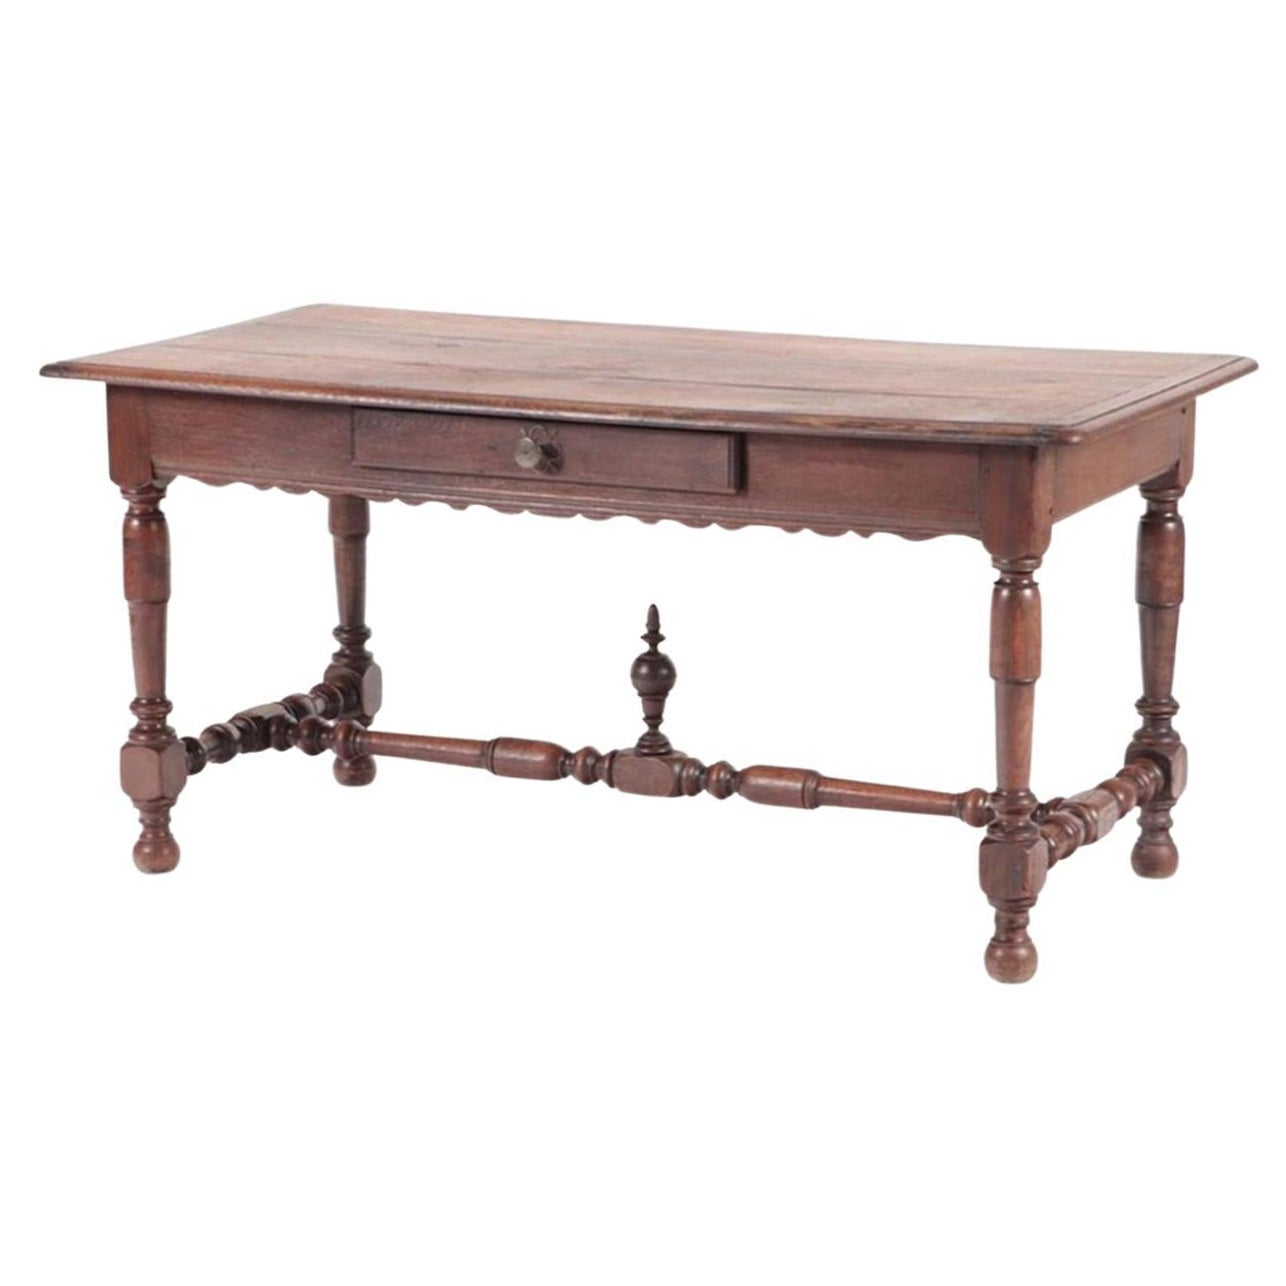 19th Century French Provincial Oak Farm Table with Drawer & Stretcher Base For Sale